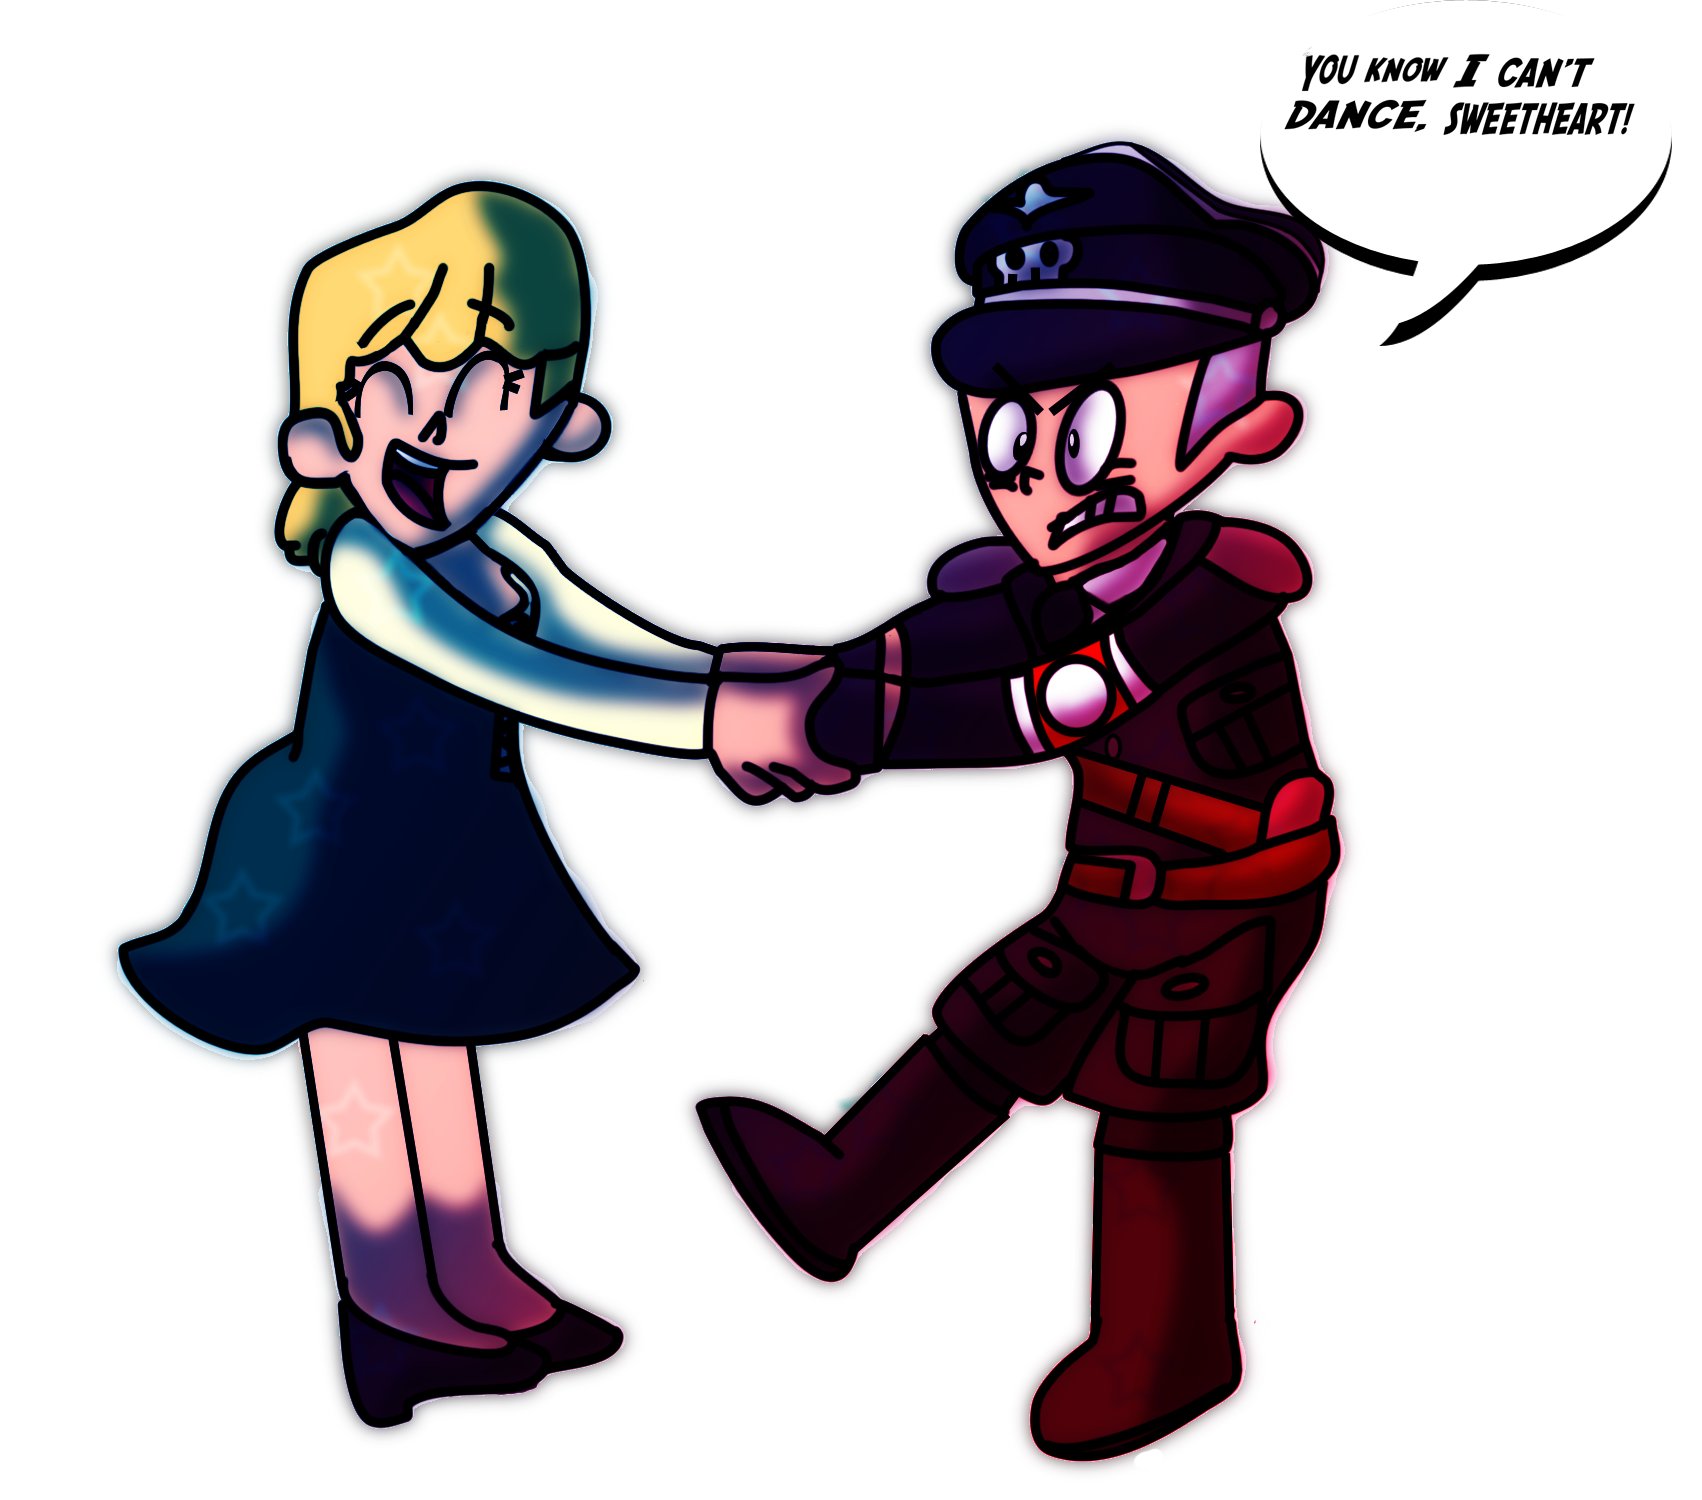 You know, I can't dance, sweetheart! by Schplitzkriegs on DeviantArt